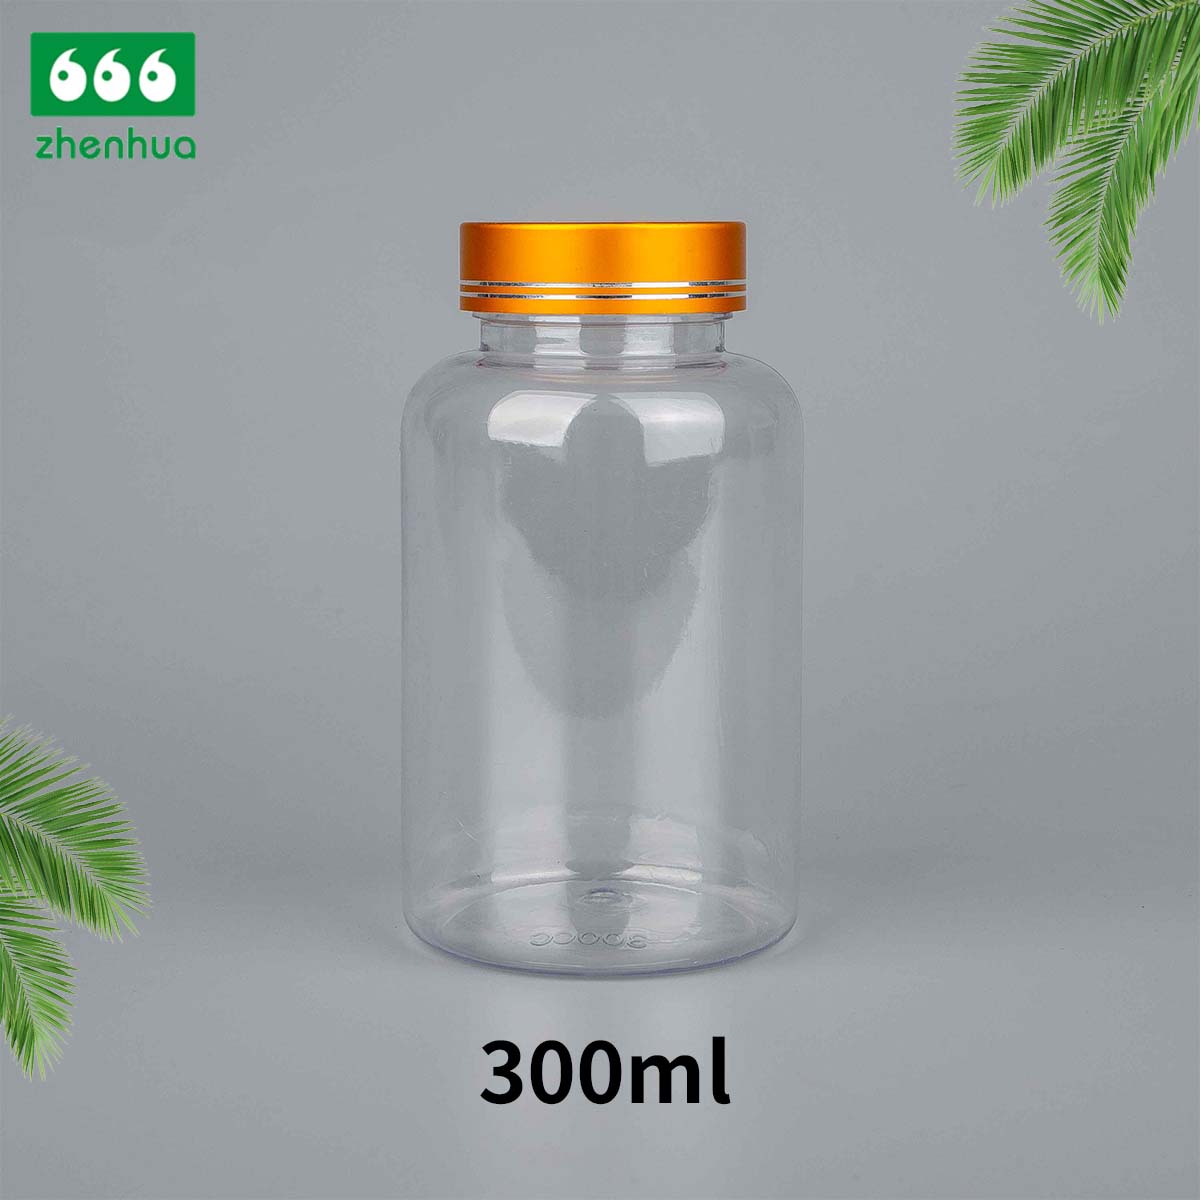 200/300/500/750ml Round Amber Fish Oil/Capsule/Nutritional Supplement PET Bottle with Pressure Screw Cap